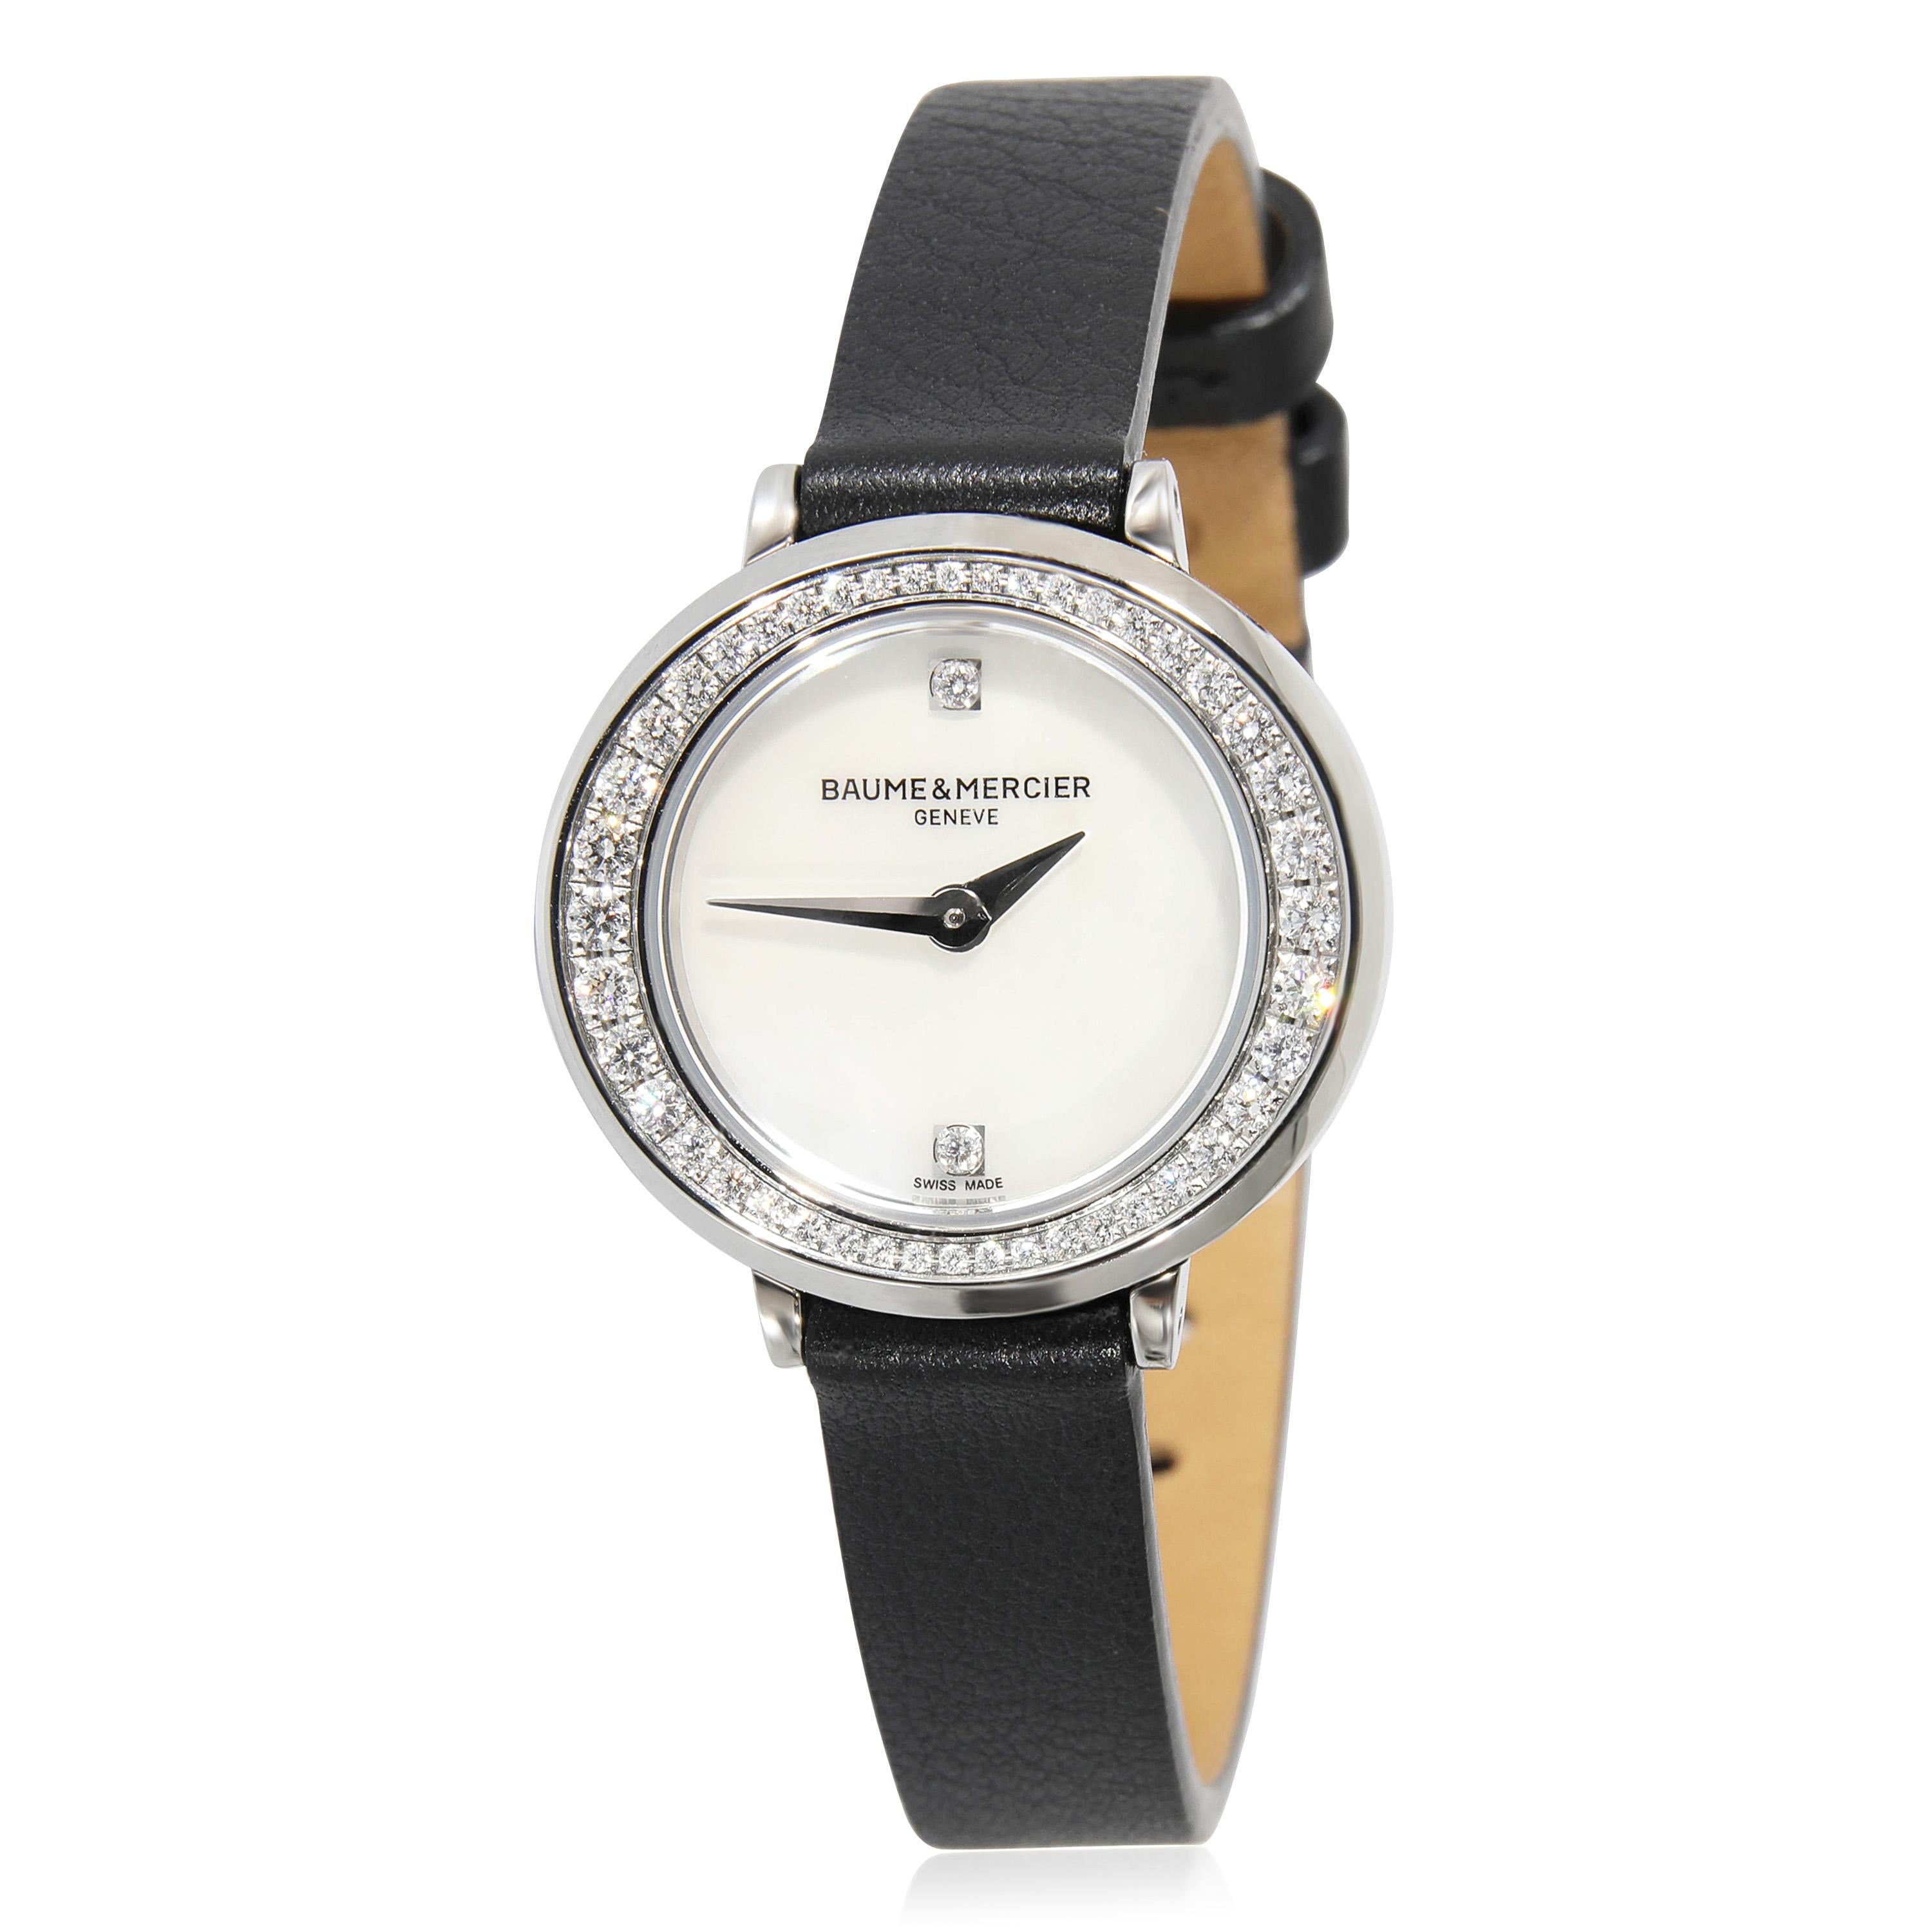 Baume & Mercier Petite Promeses MOA10290 Women's Watch in  Stainless Steel

SKU: 132217

PRIMARY DETAILS
Brand: Baume & Mercier
Model: Petite Promeses
Country of Origin: Switzerland
Movement Type: Quartz: Battery
Year of Manufacture: